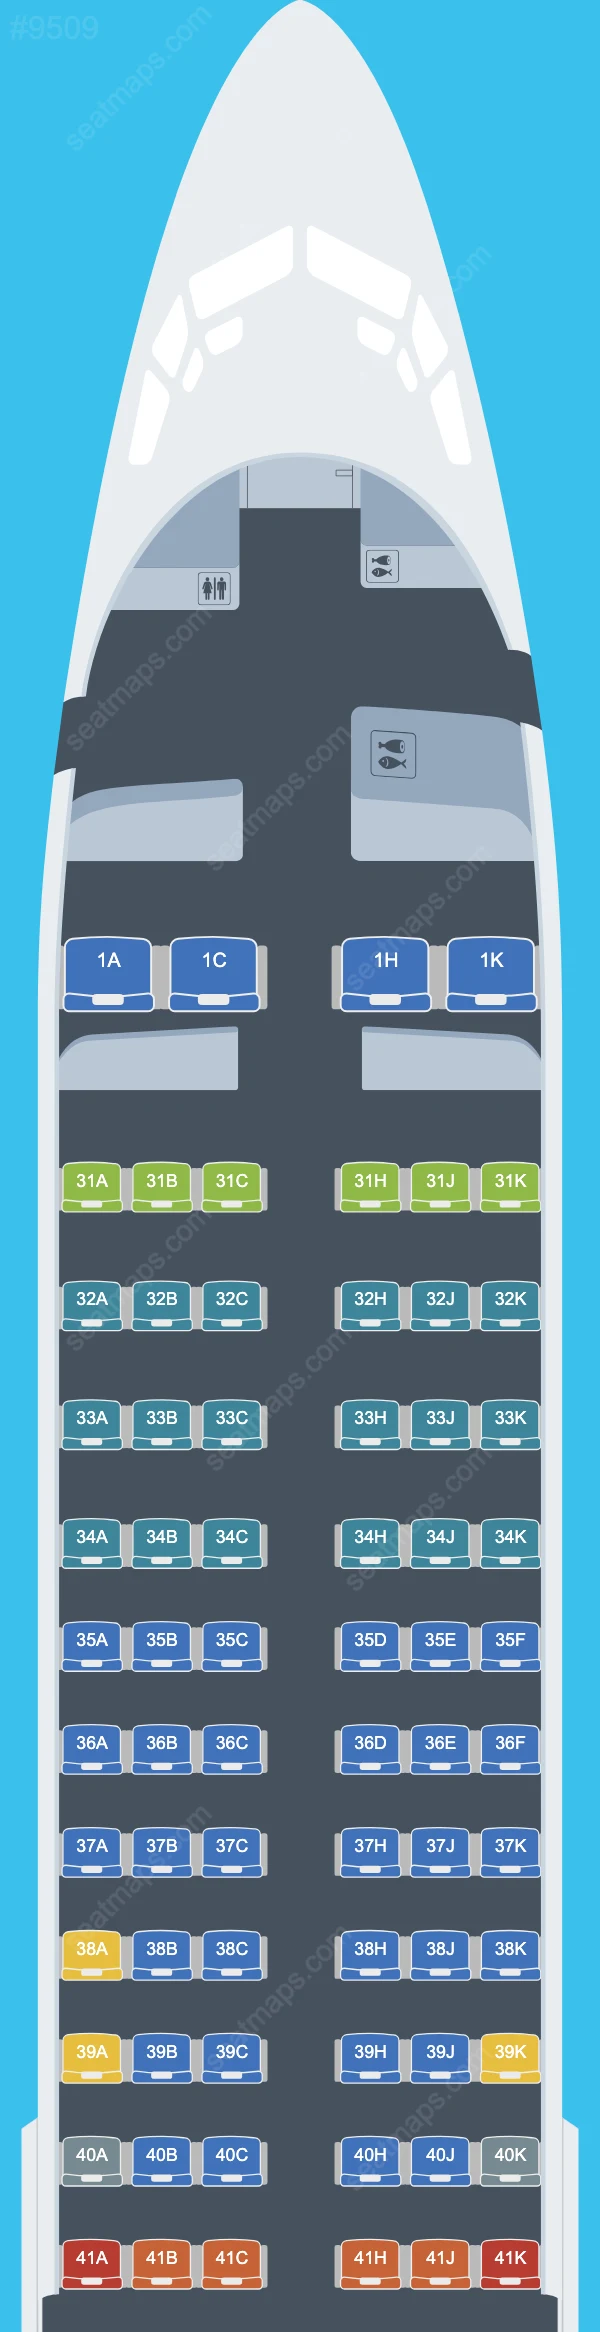 China Southern Boeing 737 Seat Maps 737-800 V.3